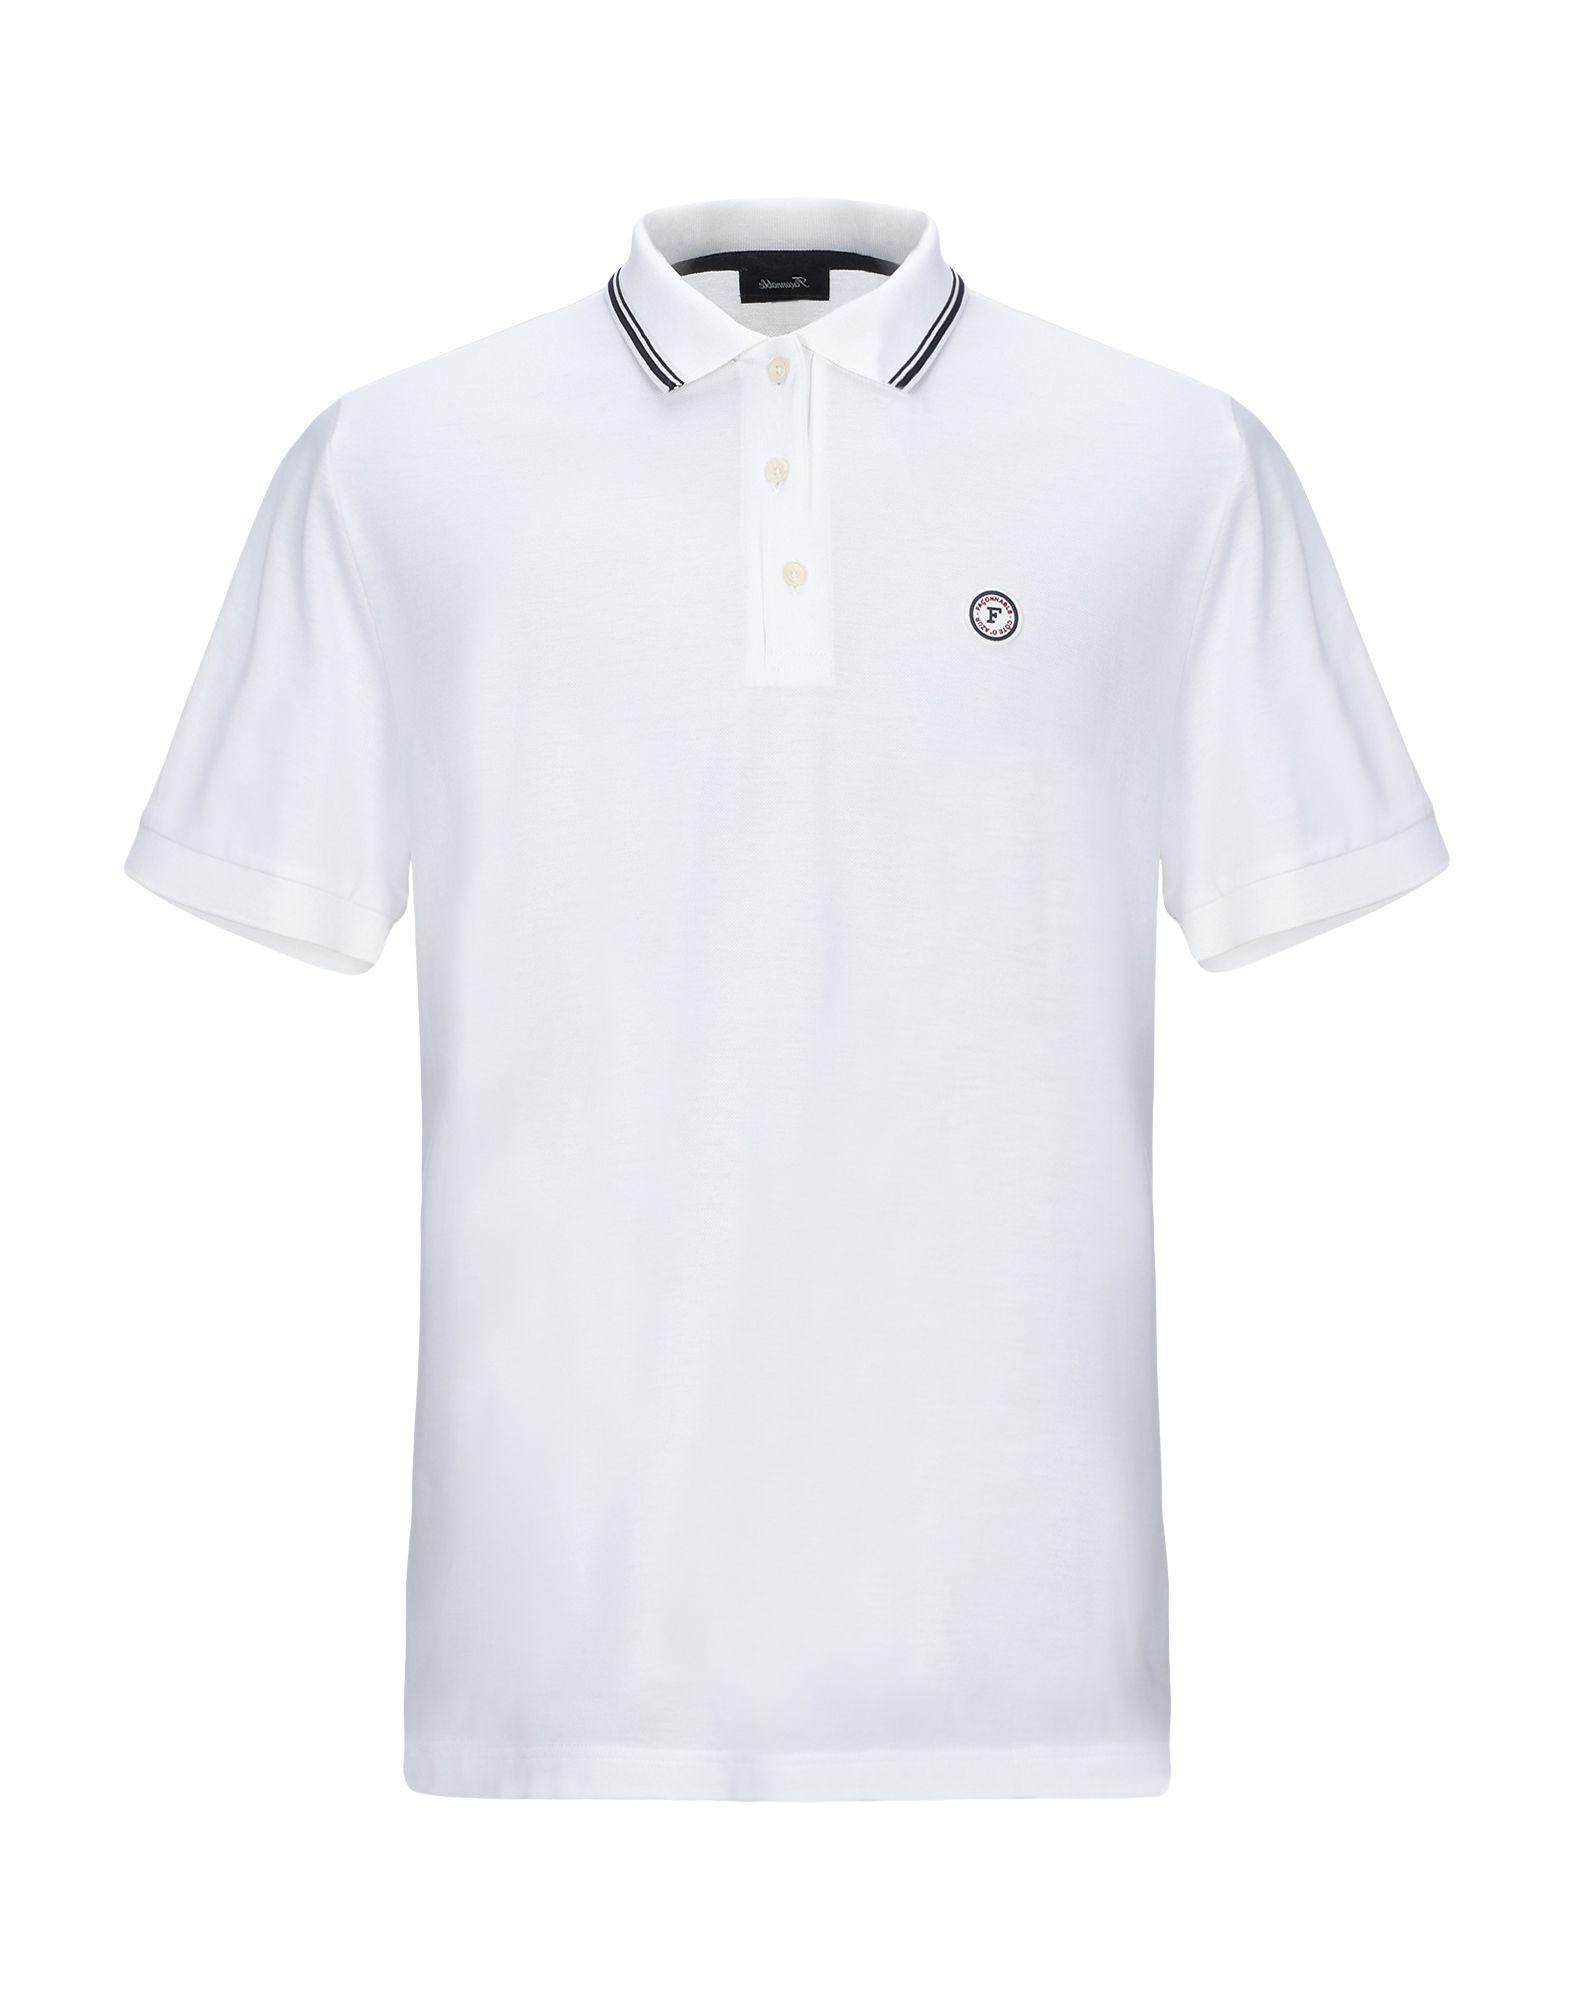 Façonnable Cotton Polo Shirt in White for Men - Lyst